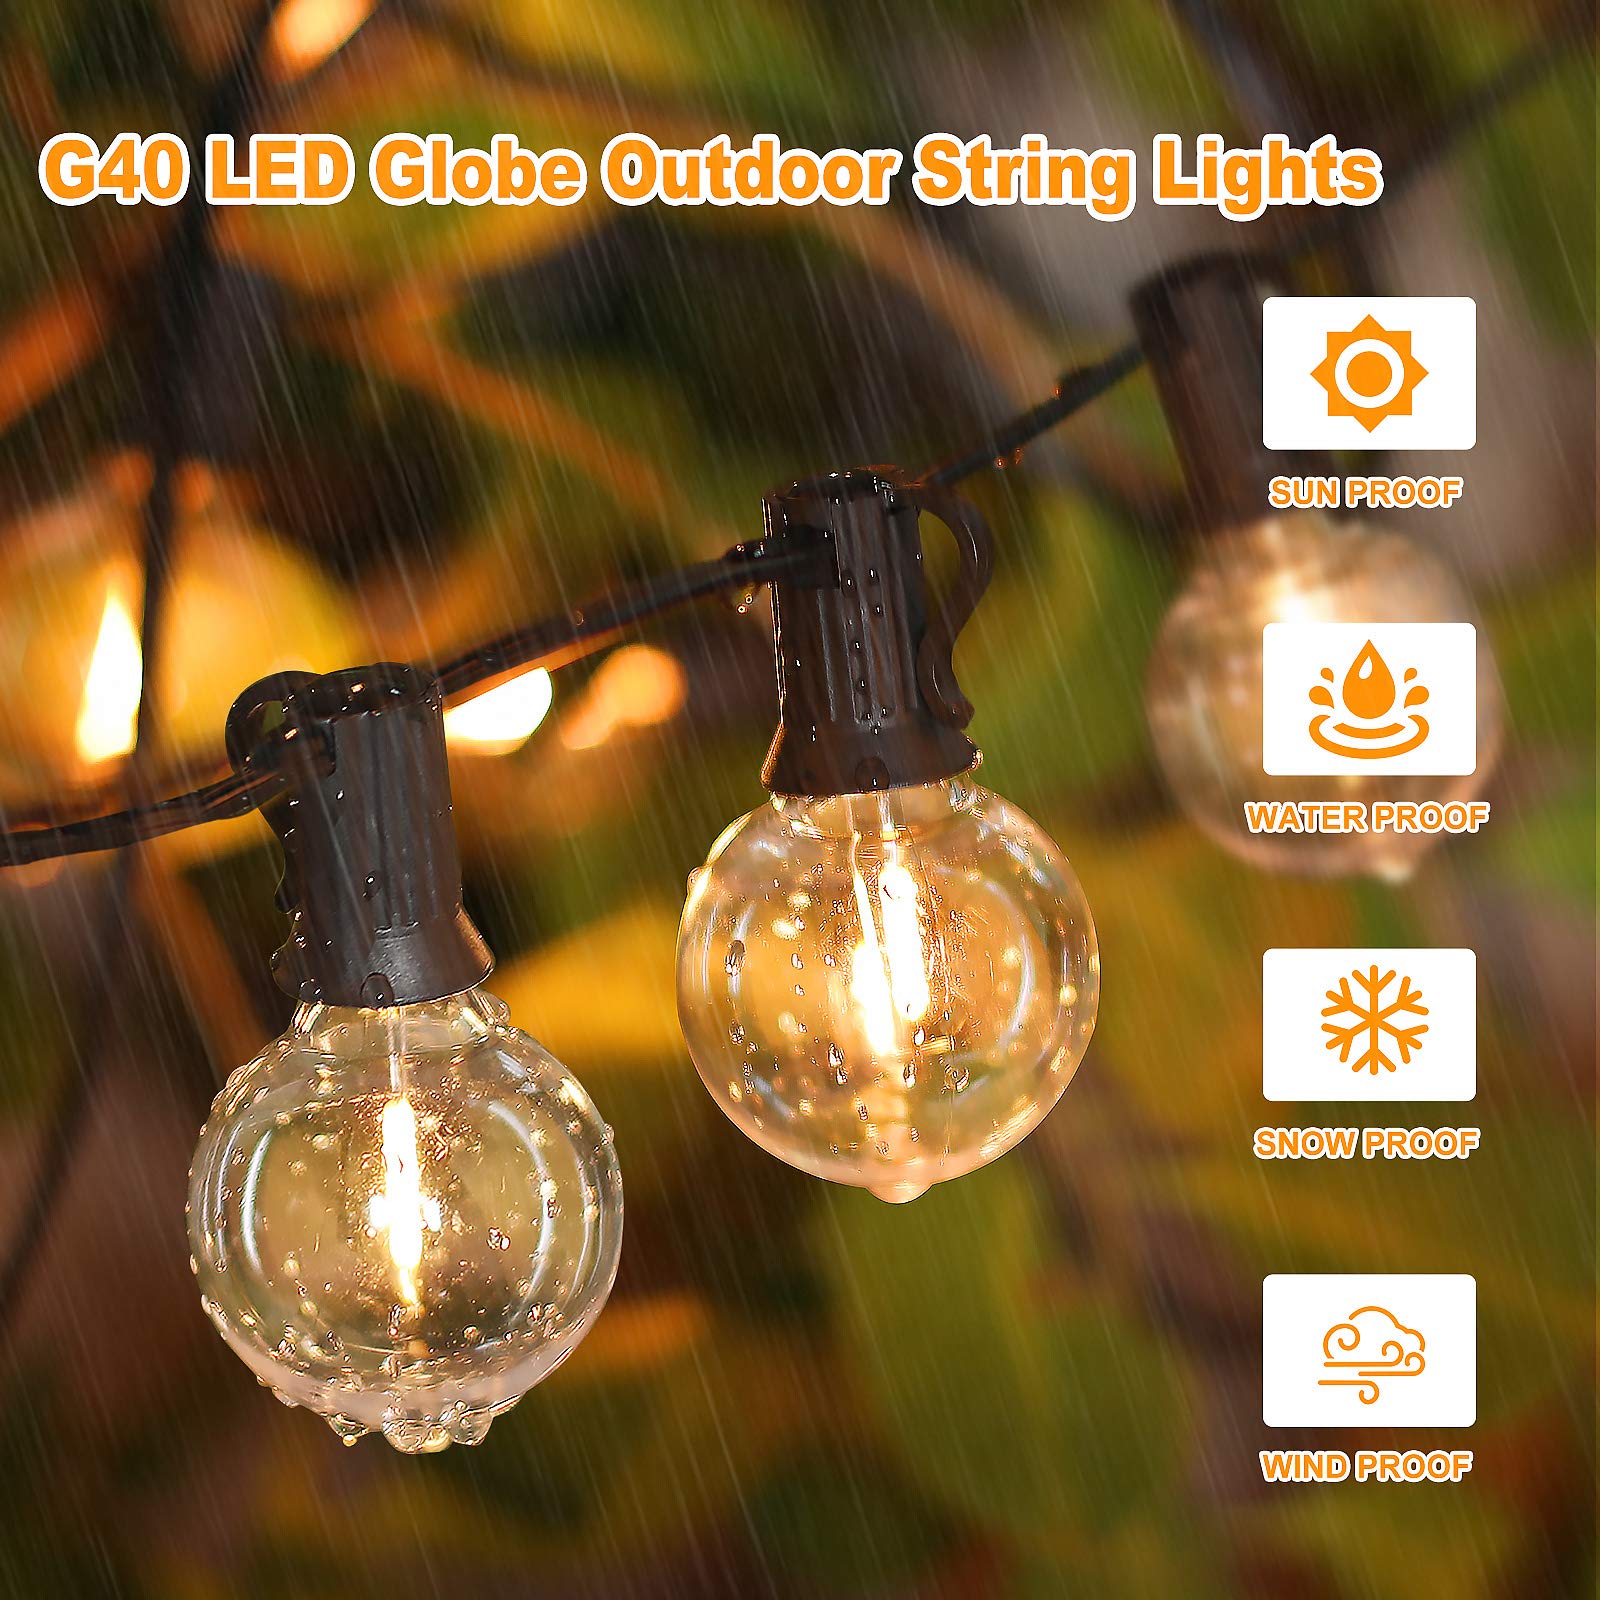 100ft 2-Pack Outdoor G40 LED Globe String Lights Dimmable Waterproof Shatterproof Light Strings with 52 Bulbs Connectable Commercial Hanging Lights for Christmas Patio House Backyard Balcony Party